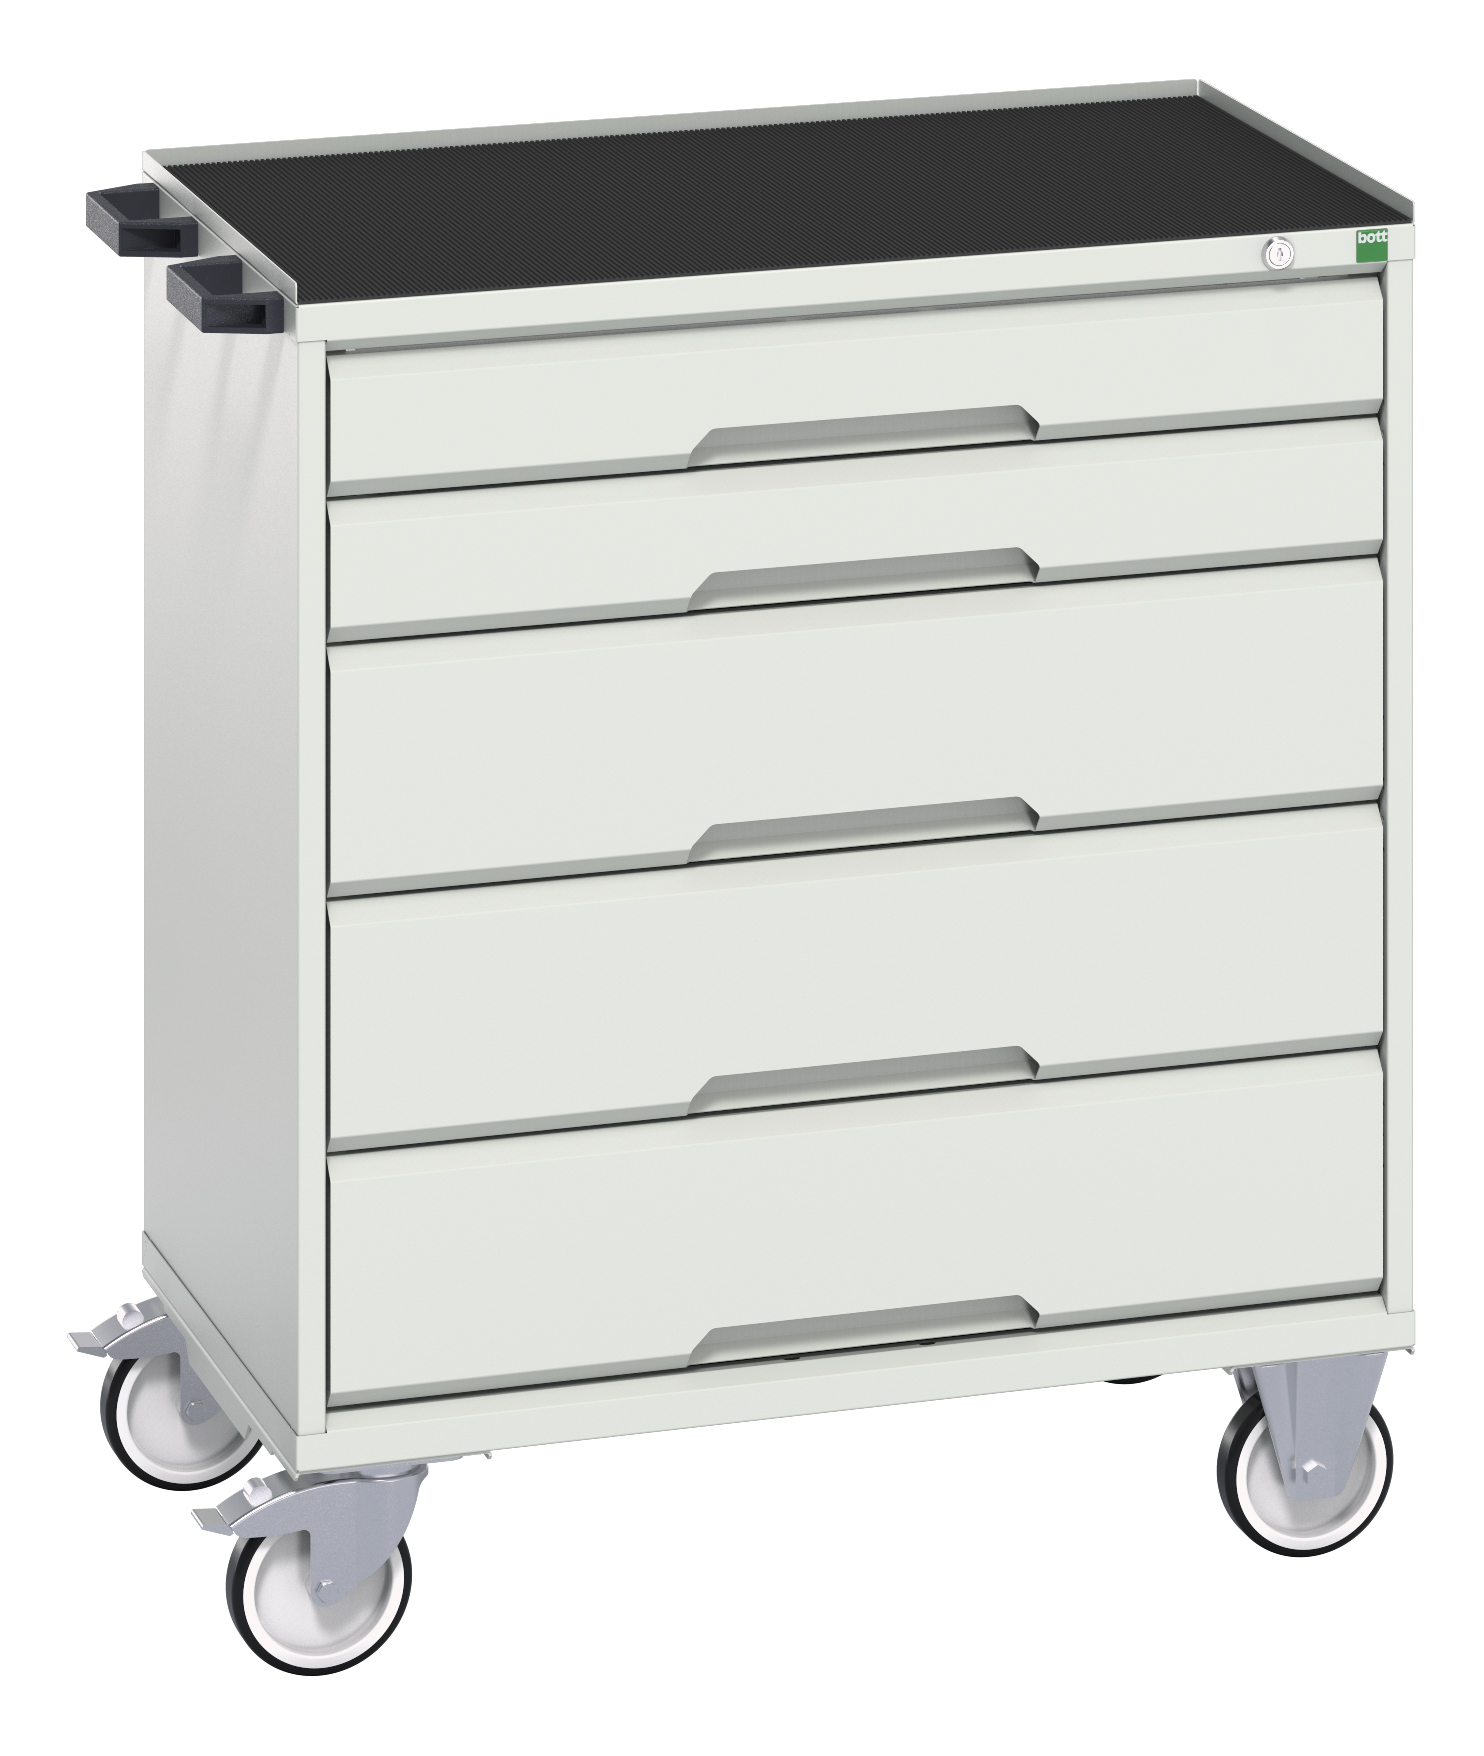 Bott Verso Mobile Drawer Cabinet With 5 Drawers & Top Tray With Mat - 16927002.16